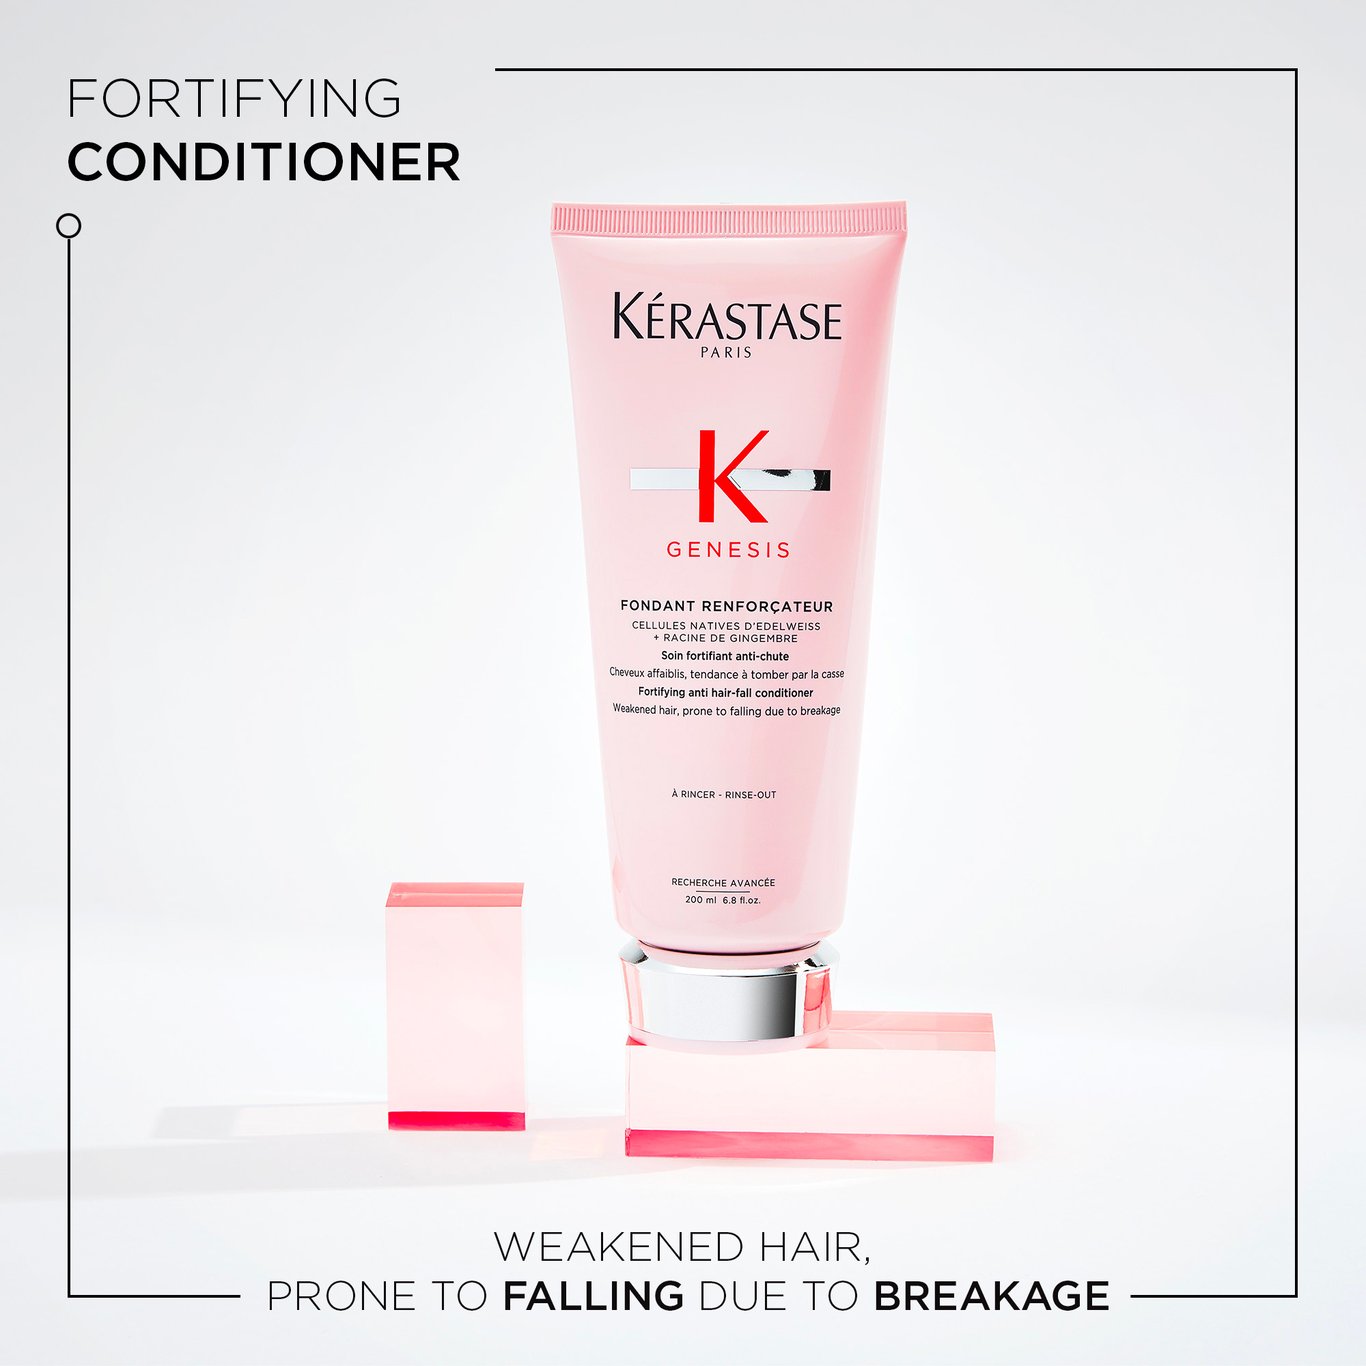 Fortifying Conditioner. Weakened hair, prone to falling due to breakage